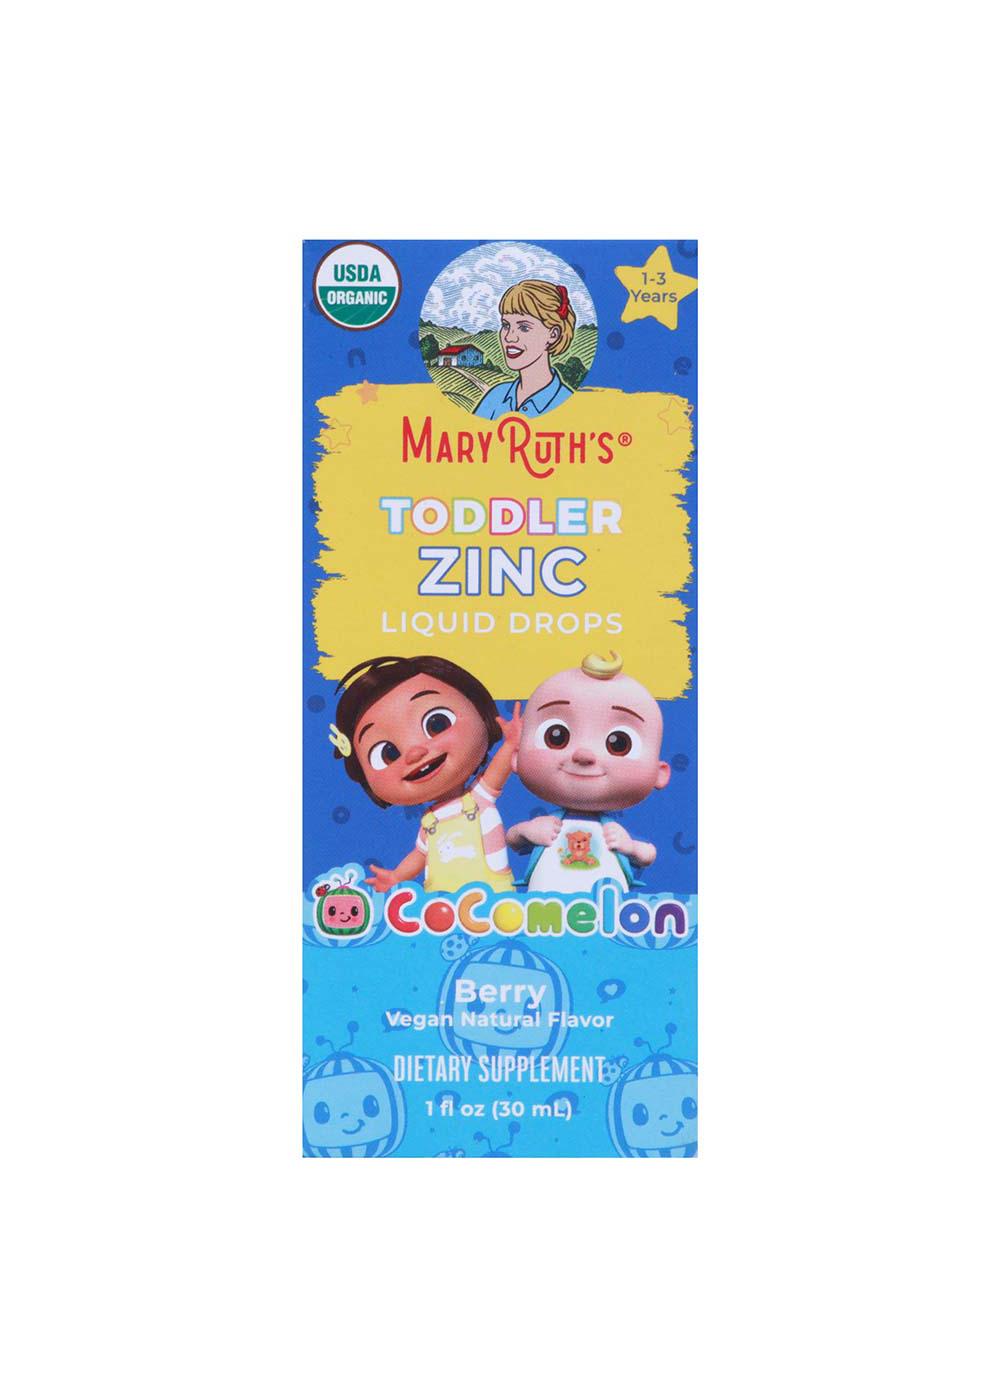 Mary Ruth's Toddler Zinc Liquid Drops - Berry; image 1 of 2